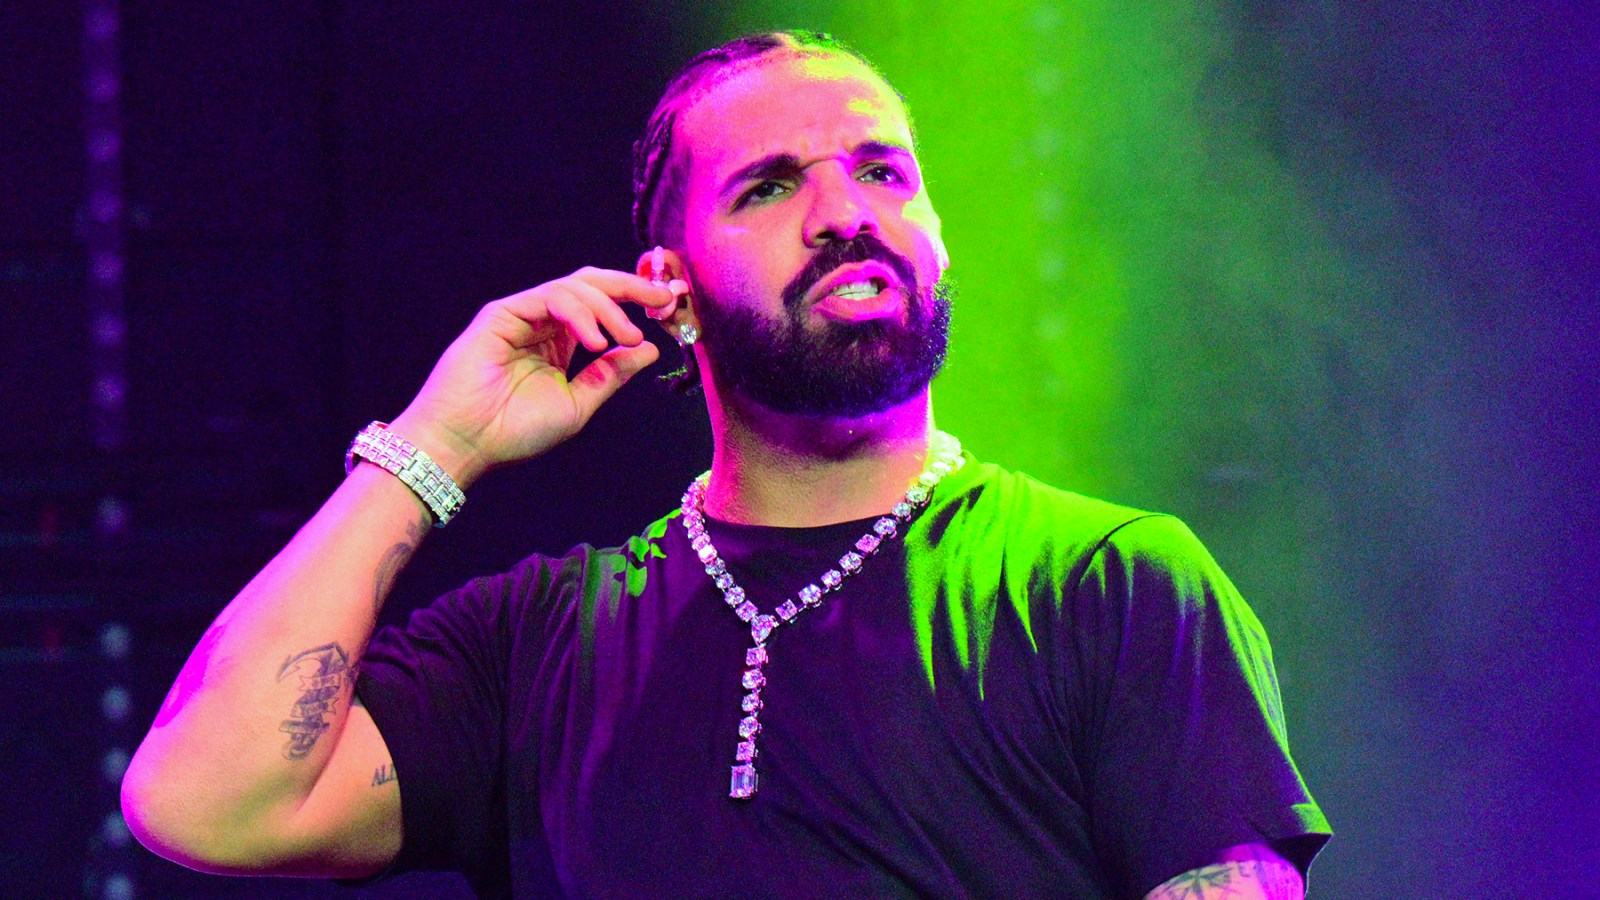 Drake Mostly Made Himself Look Bad on His Latest Diss